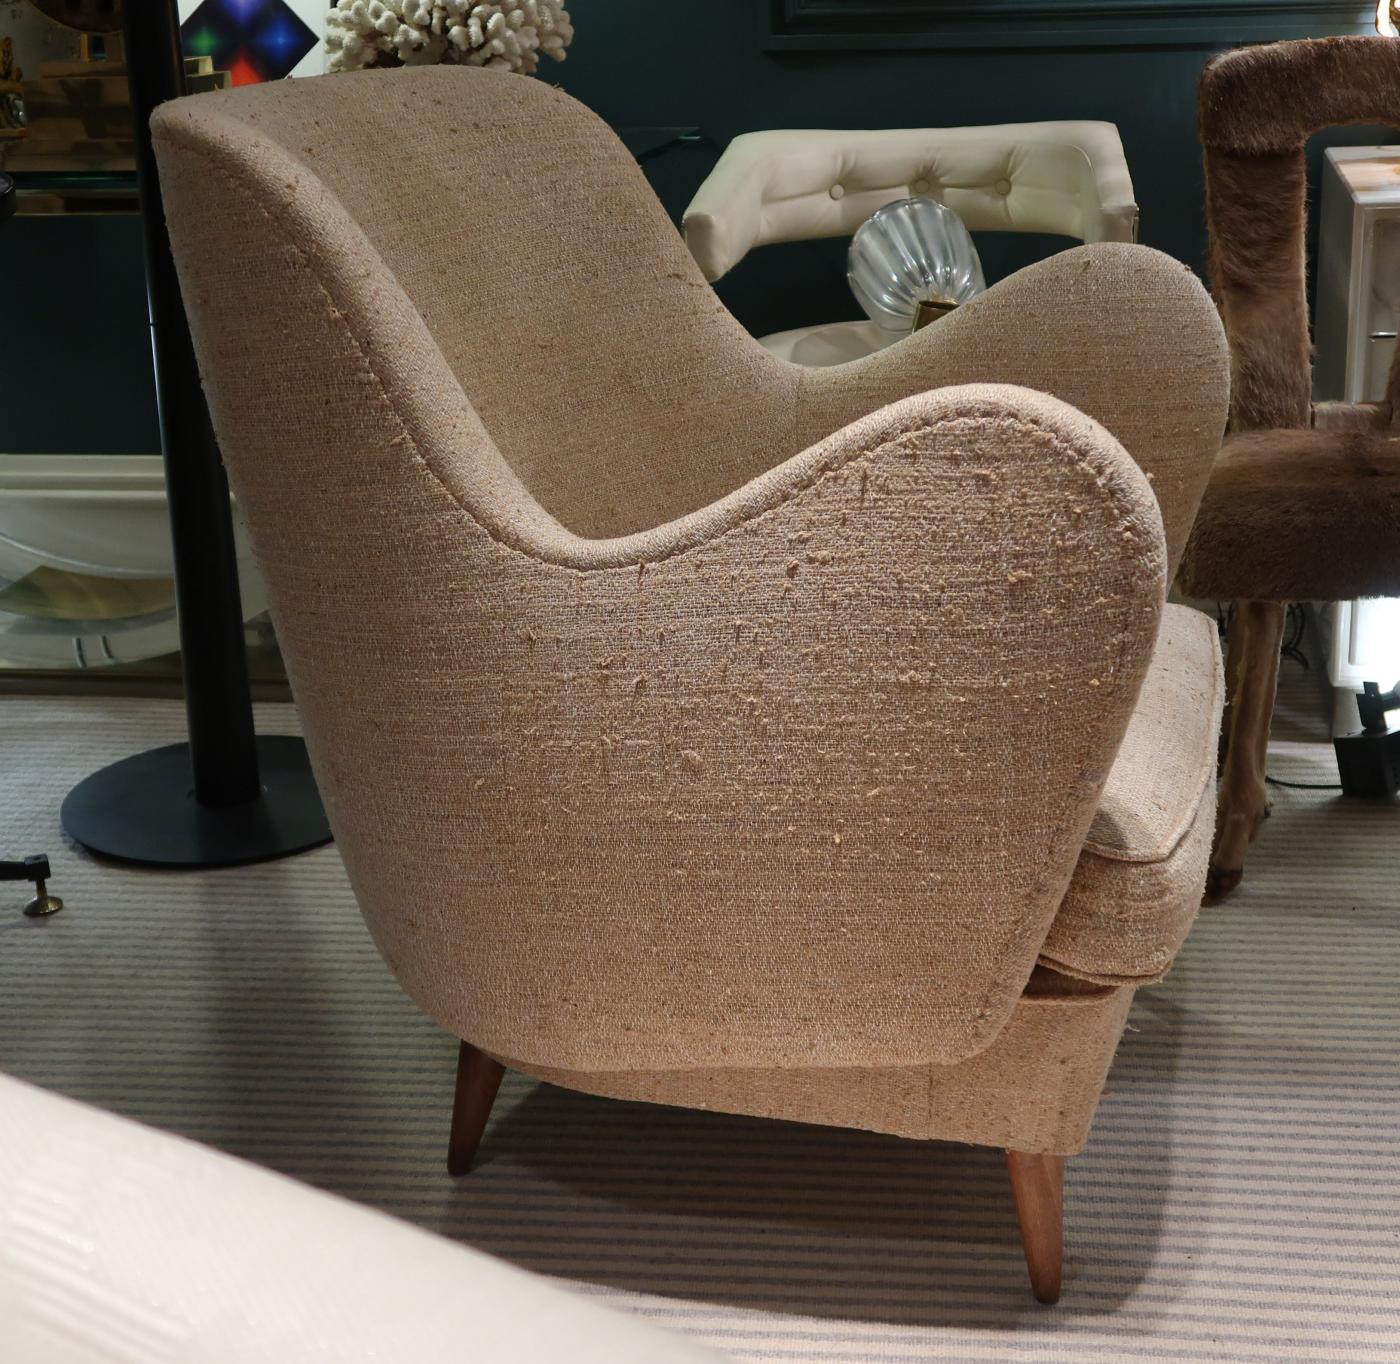 ISA, Pair of Beige Indian Silk and Wood Legs Midcentury Italian Armchairs, 1950 For Sale 4